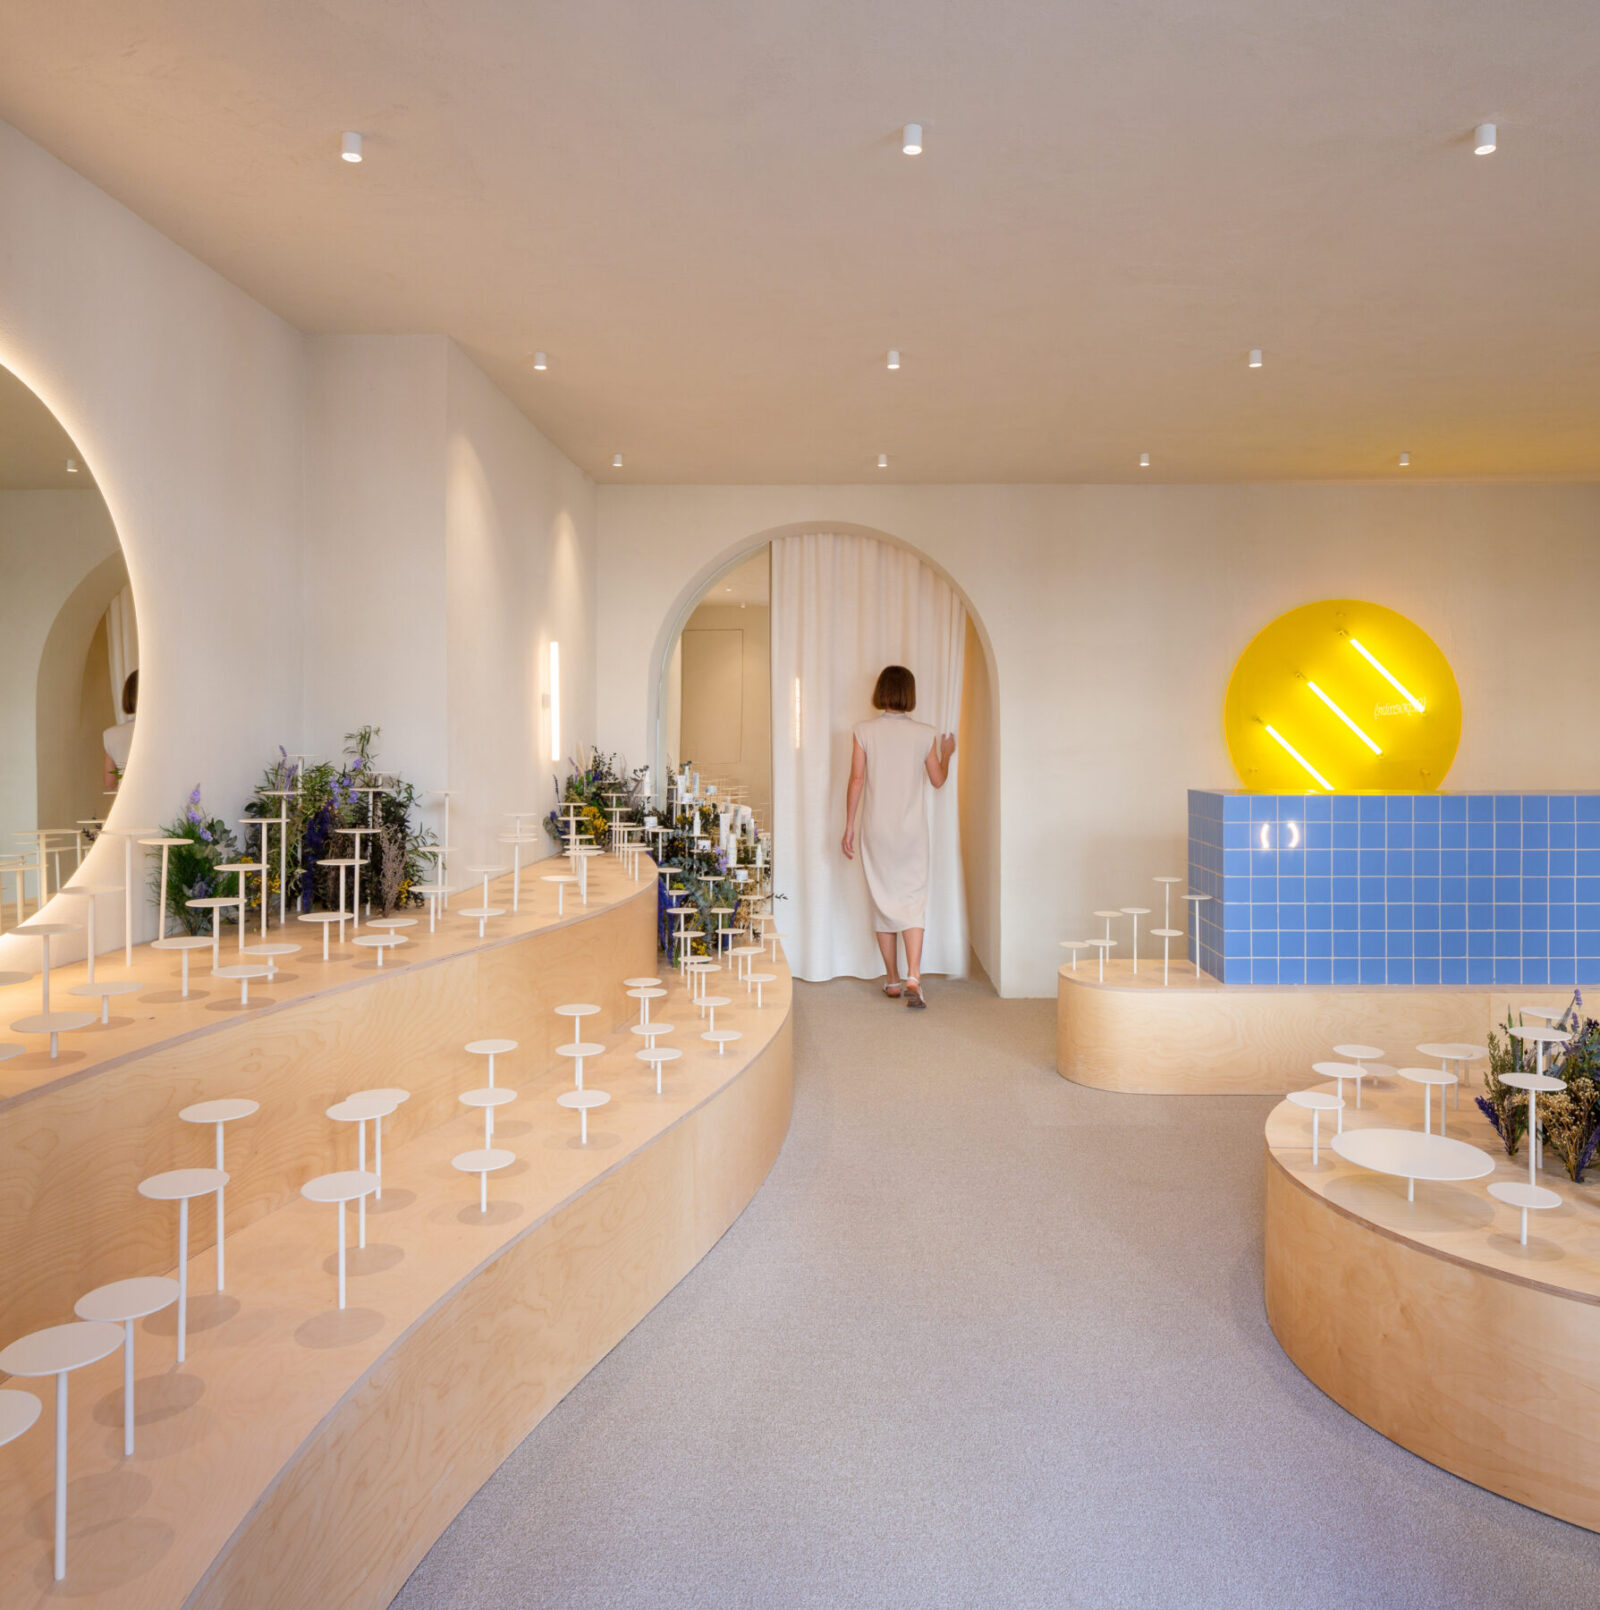 Archisearch Clap Studio recreates an Aster field with real and conceptual flowers at the interior of Septiembre Clinic